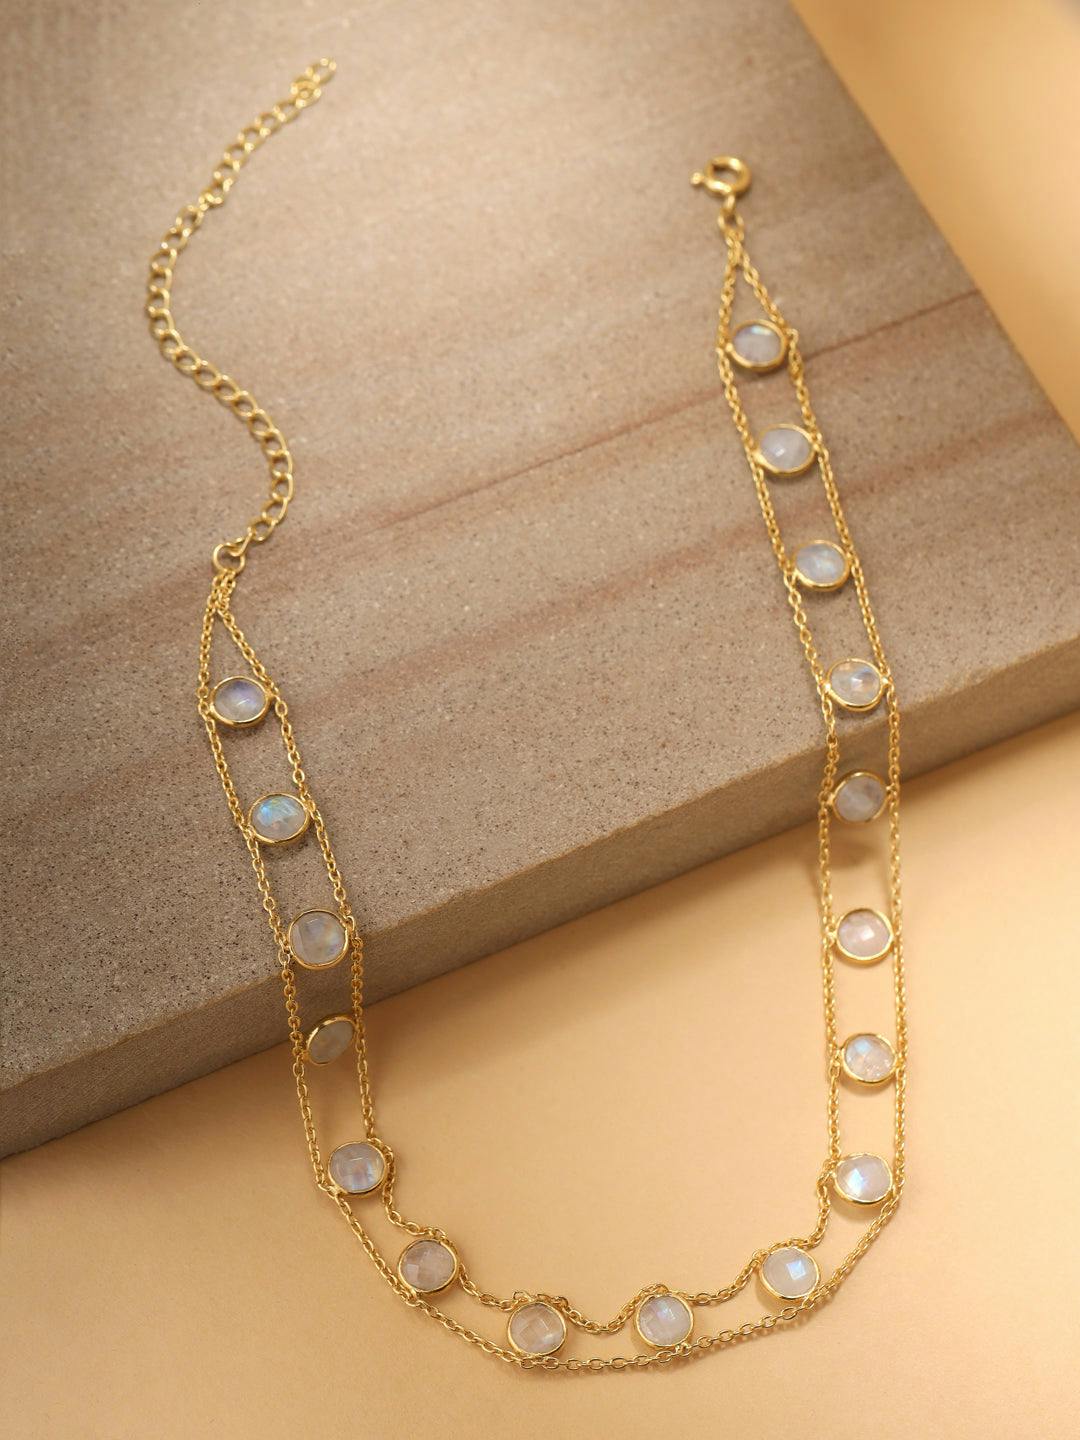 Moonstone choker necklace, a product by The Jewel Closet Store